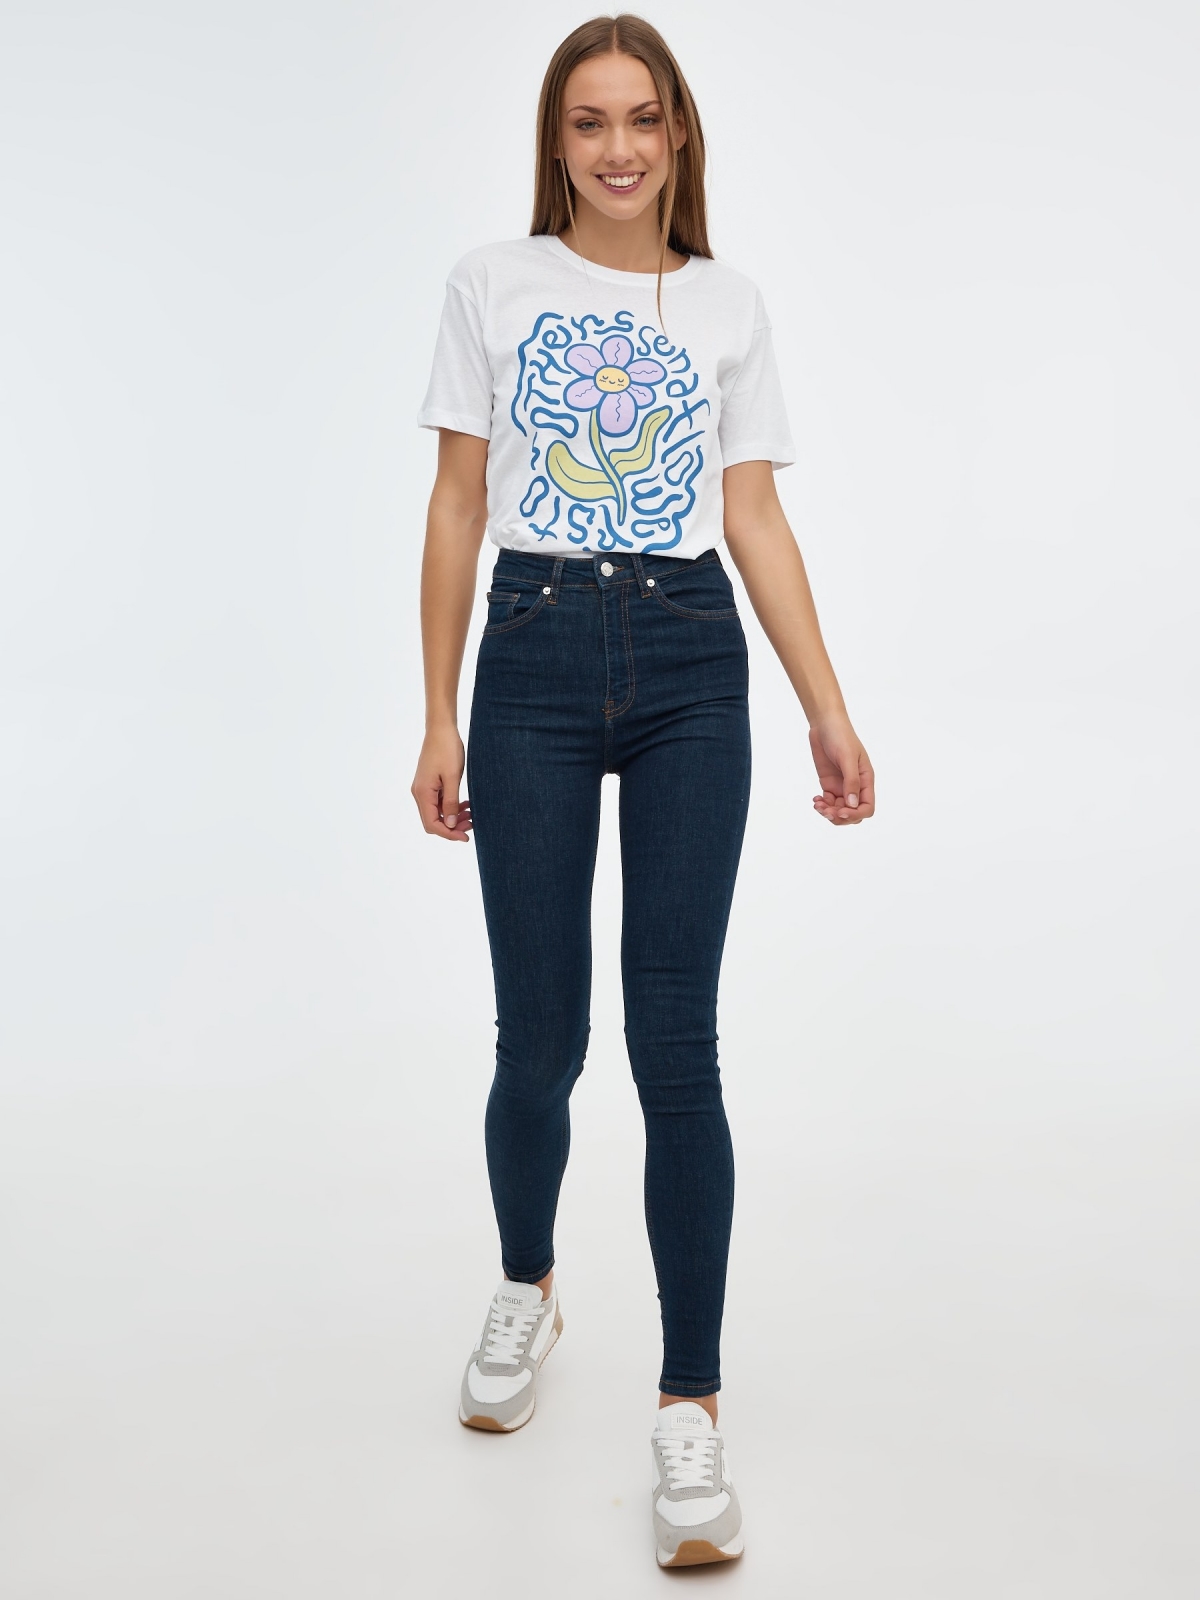 Flower print t-shirt white front view